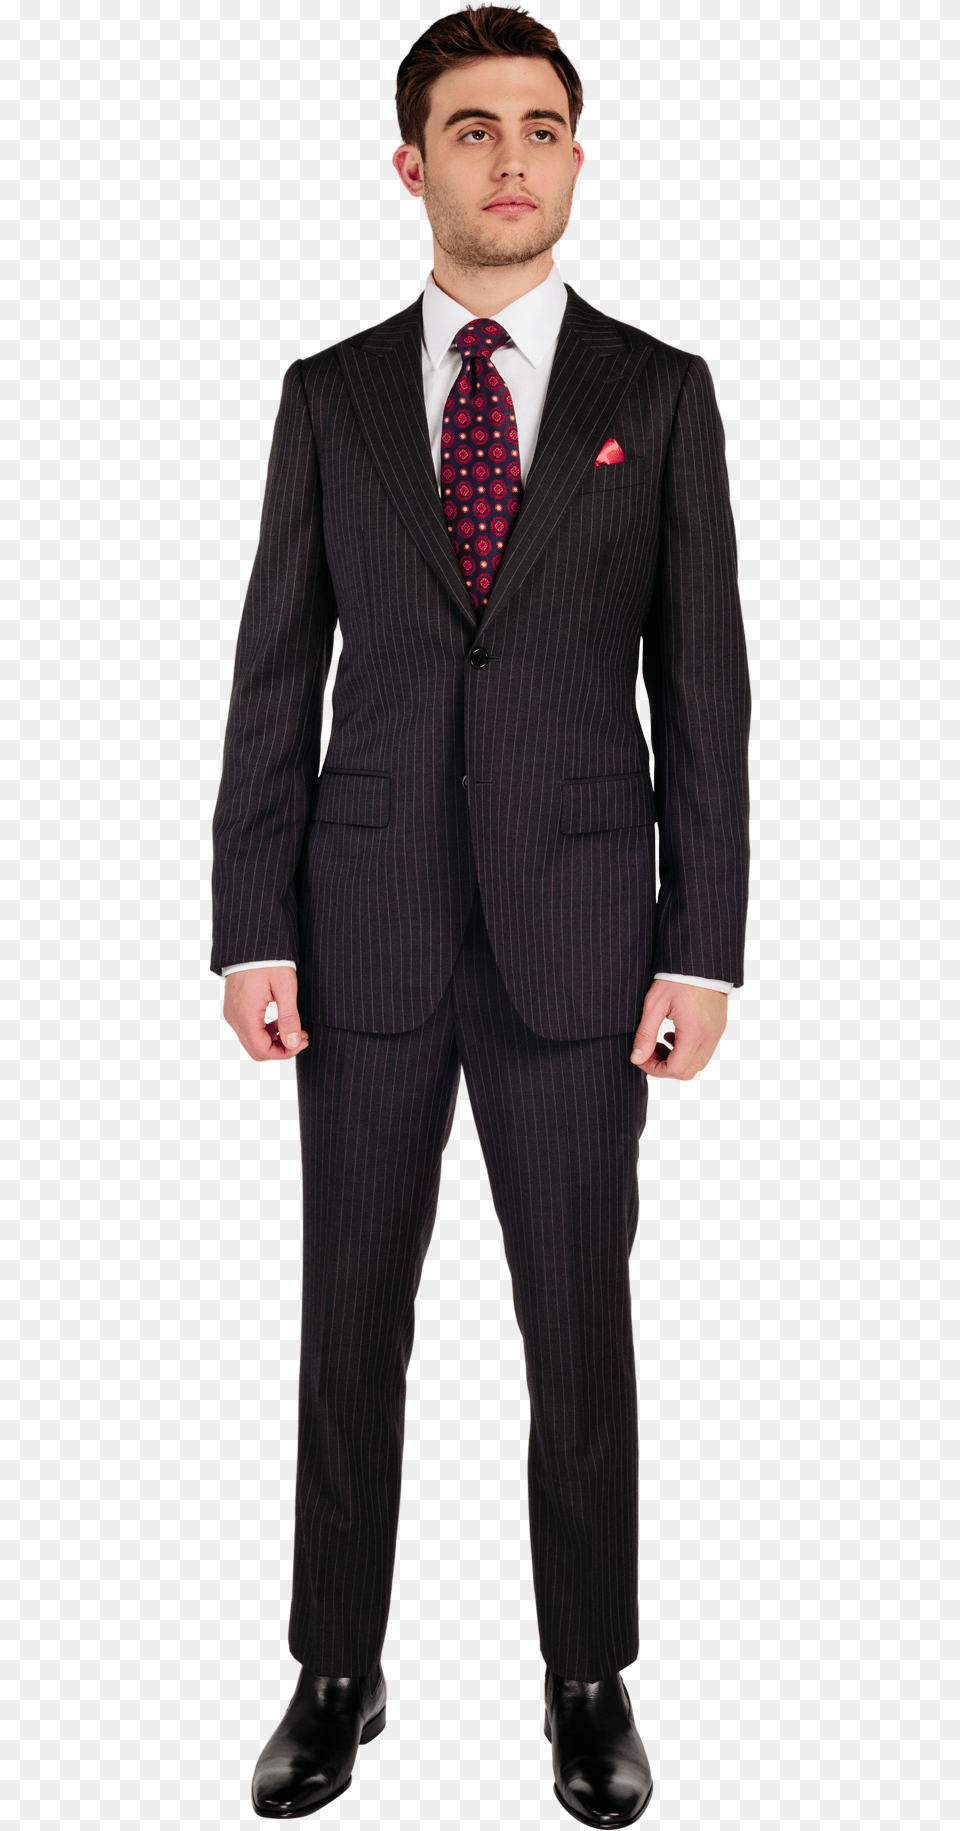 Guy In A Suit Guy In A Suit Suit, Accessories, Tie, Tuxedo, Formal Wear Free Png Download